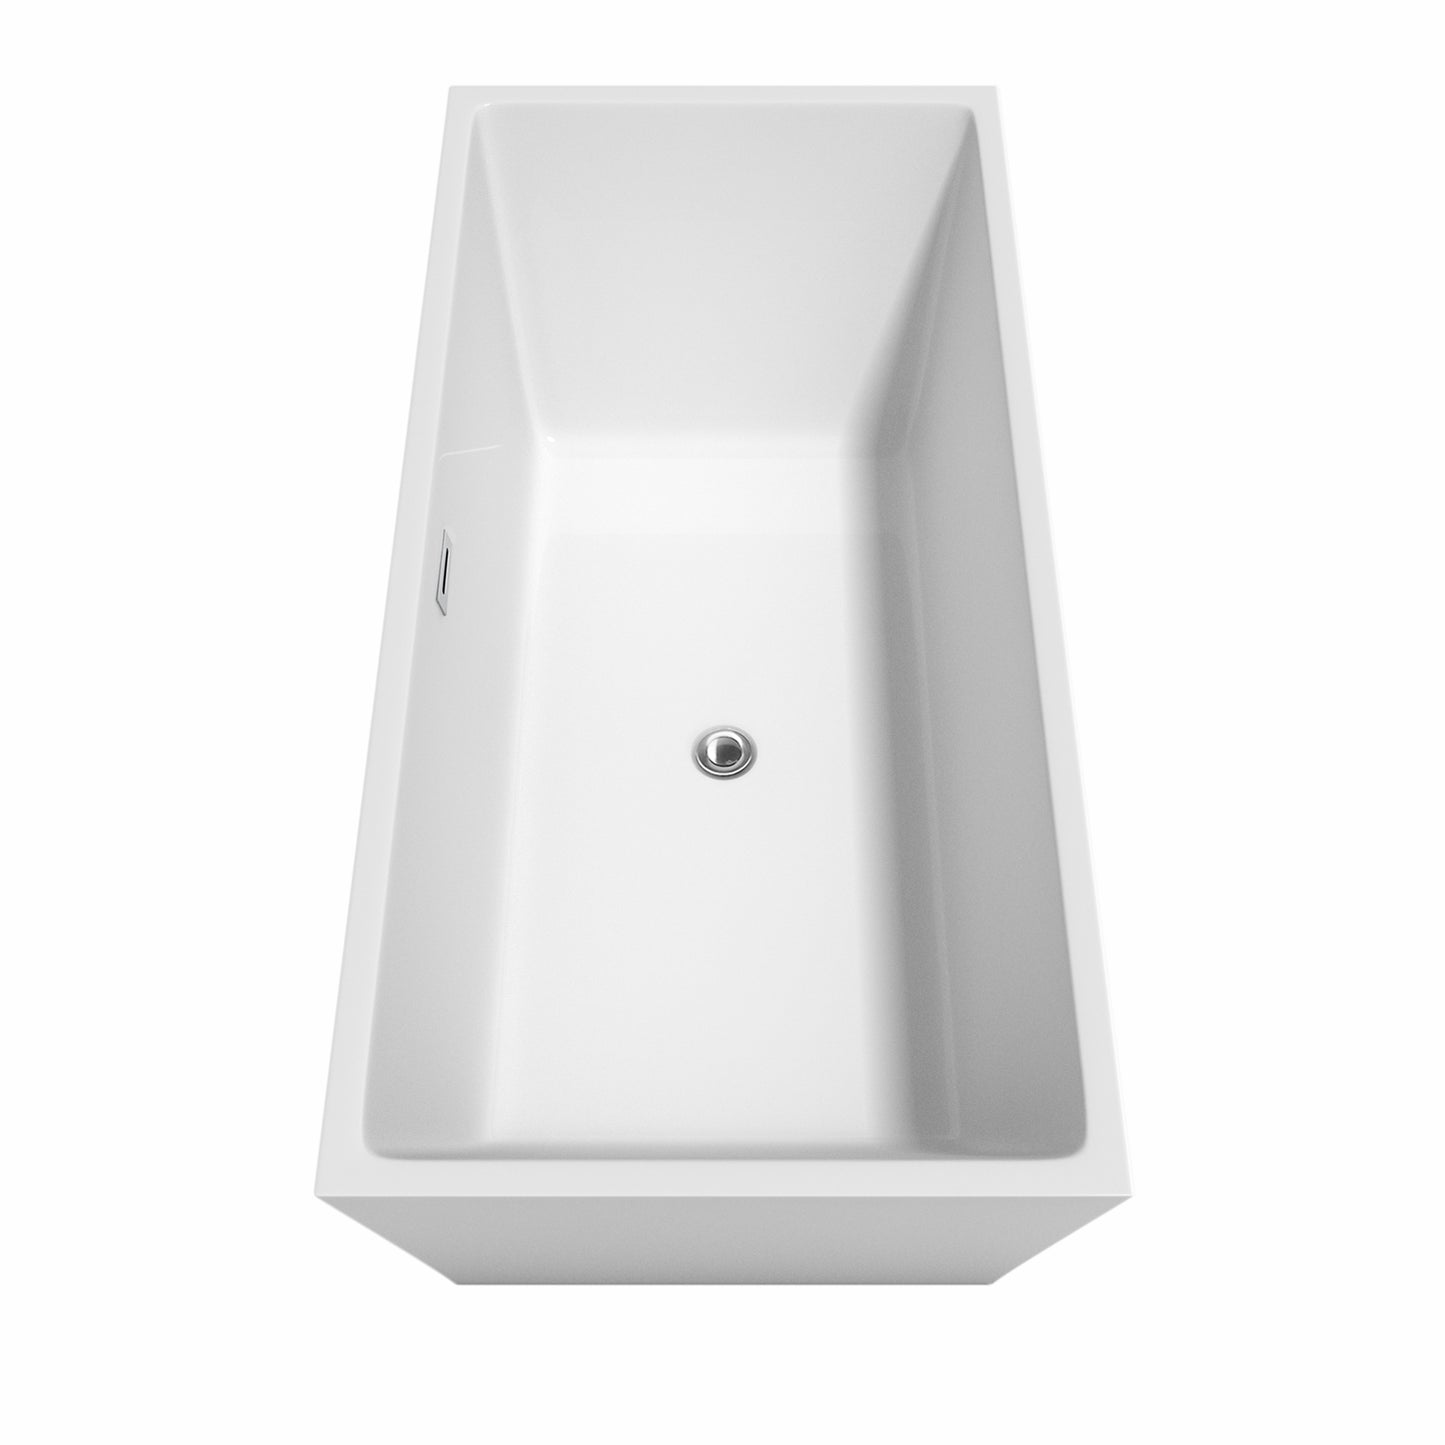 Wyndham Collection Sara 67 Inch Freestanding Bathtub in White with Floor Mounted Faucet, Drain and Overflow Trim - Luxe Bathroom Vanities